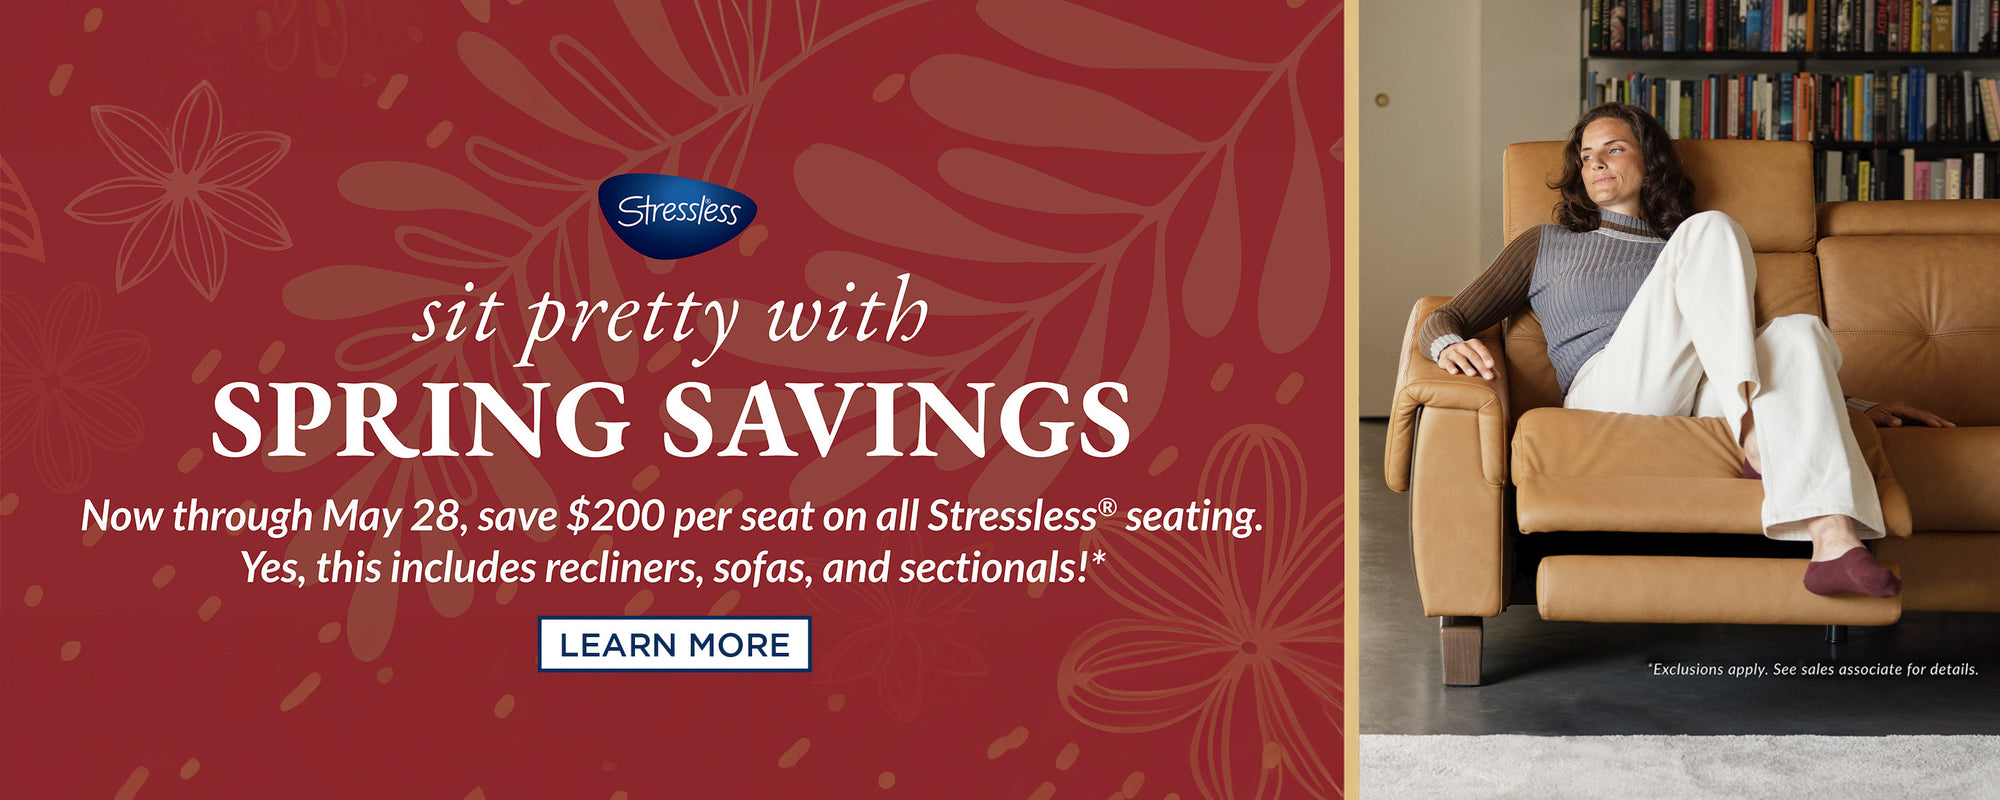 Banner for Stressless Spring Savings event. It features a maroon background with floral patterns and the slogan 'sit pretty with SPRING SAVINGS' in white and tan text. On the right side, a woman relaxes in a caramel-colored Stressless recliner, looking content. A bookshelf filled with books is behind her, indicating a cozy reading nook. The promotion offers $200 off per seat on all Stressless seating until May 28, with a 'LEARN MORE' button in the center for more details.